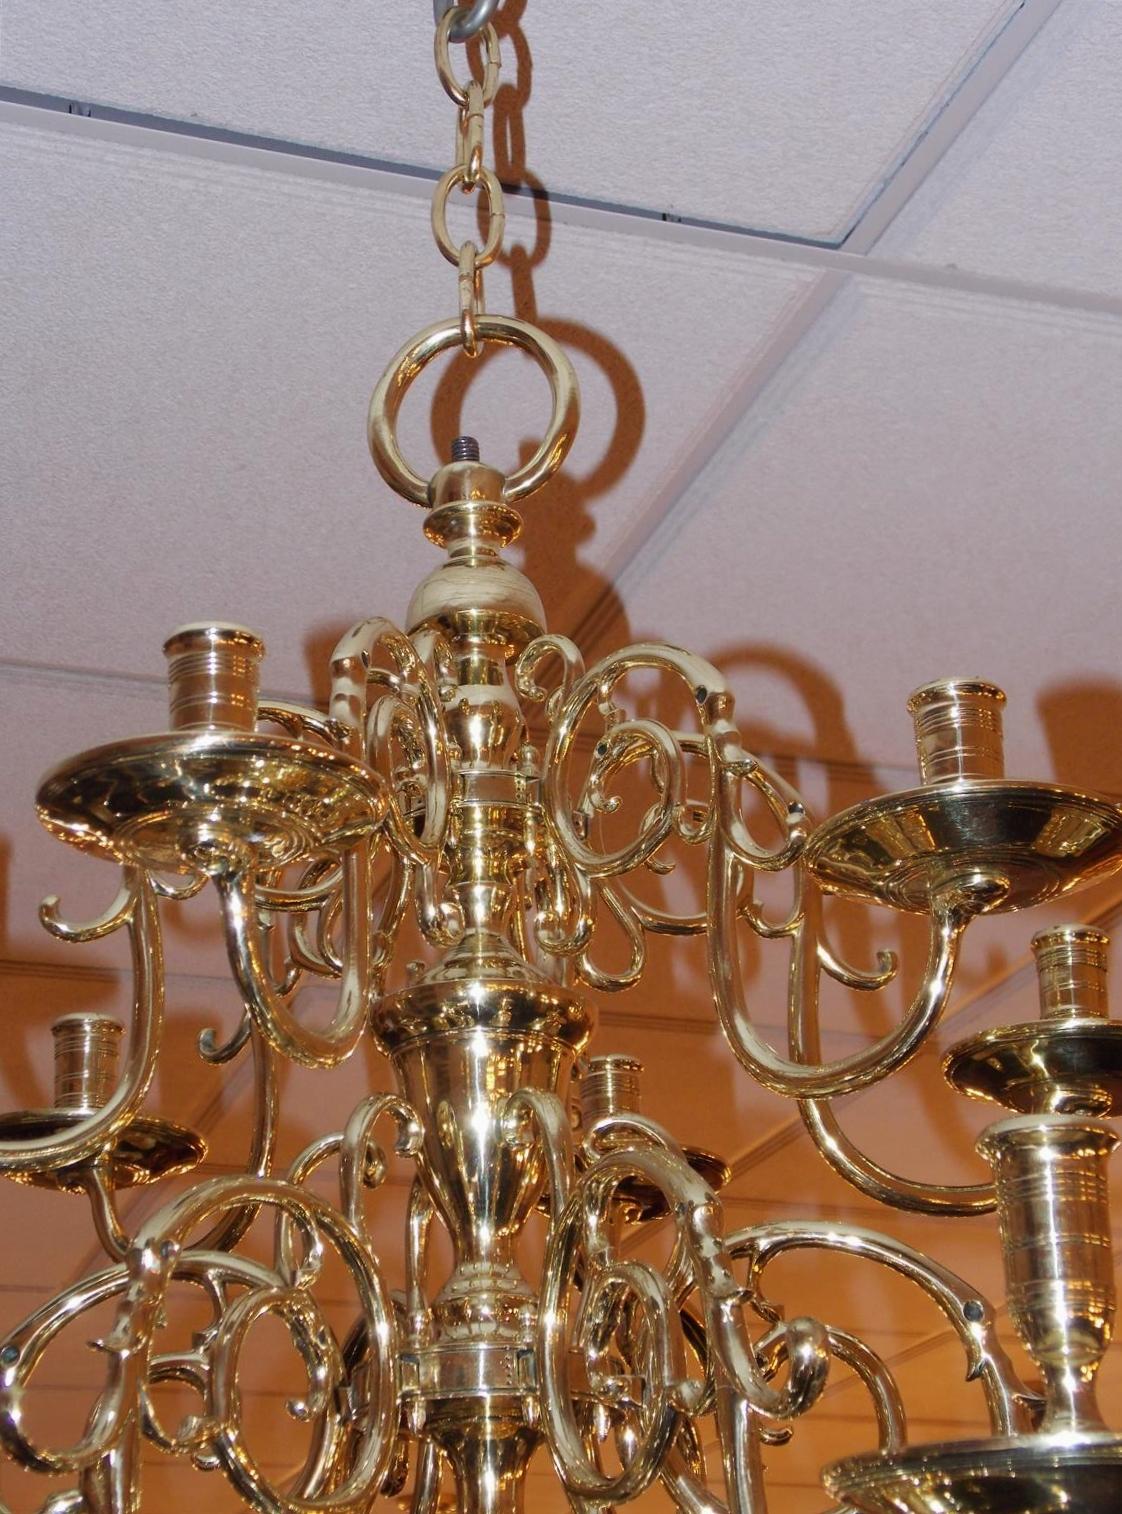 Dutch Colonial three-tier brass eighteen light chandelier with scrolled decorative arms, original bobeches, centered bulbous column, and terminating on a lower large ringed ball with ring finial. Candle powered and can be electrified if desired,